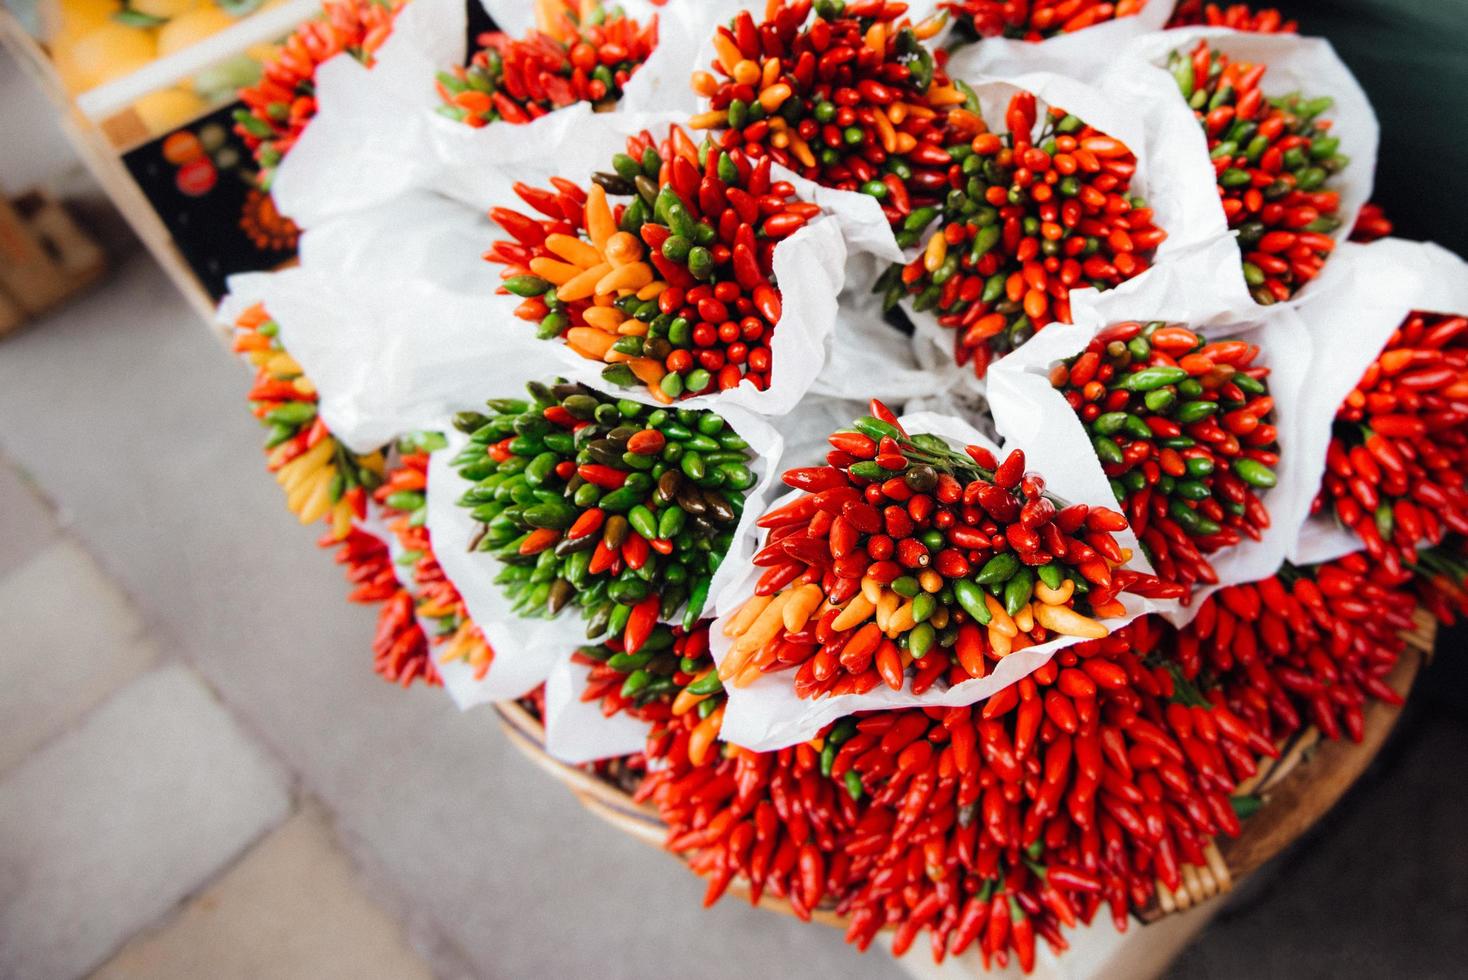 A bunch of crispy chili peppers photo